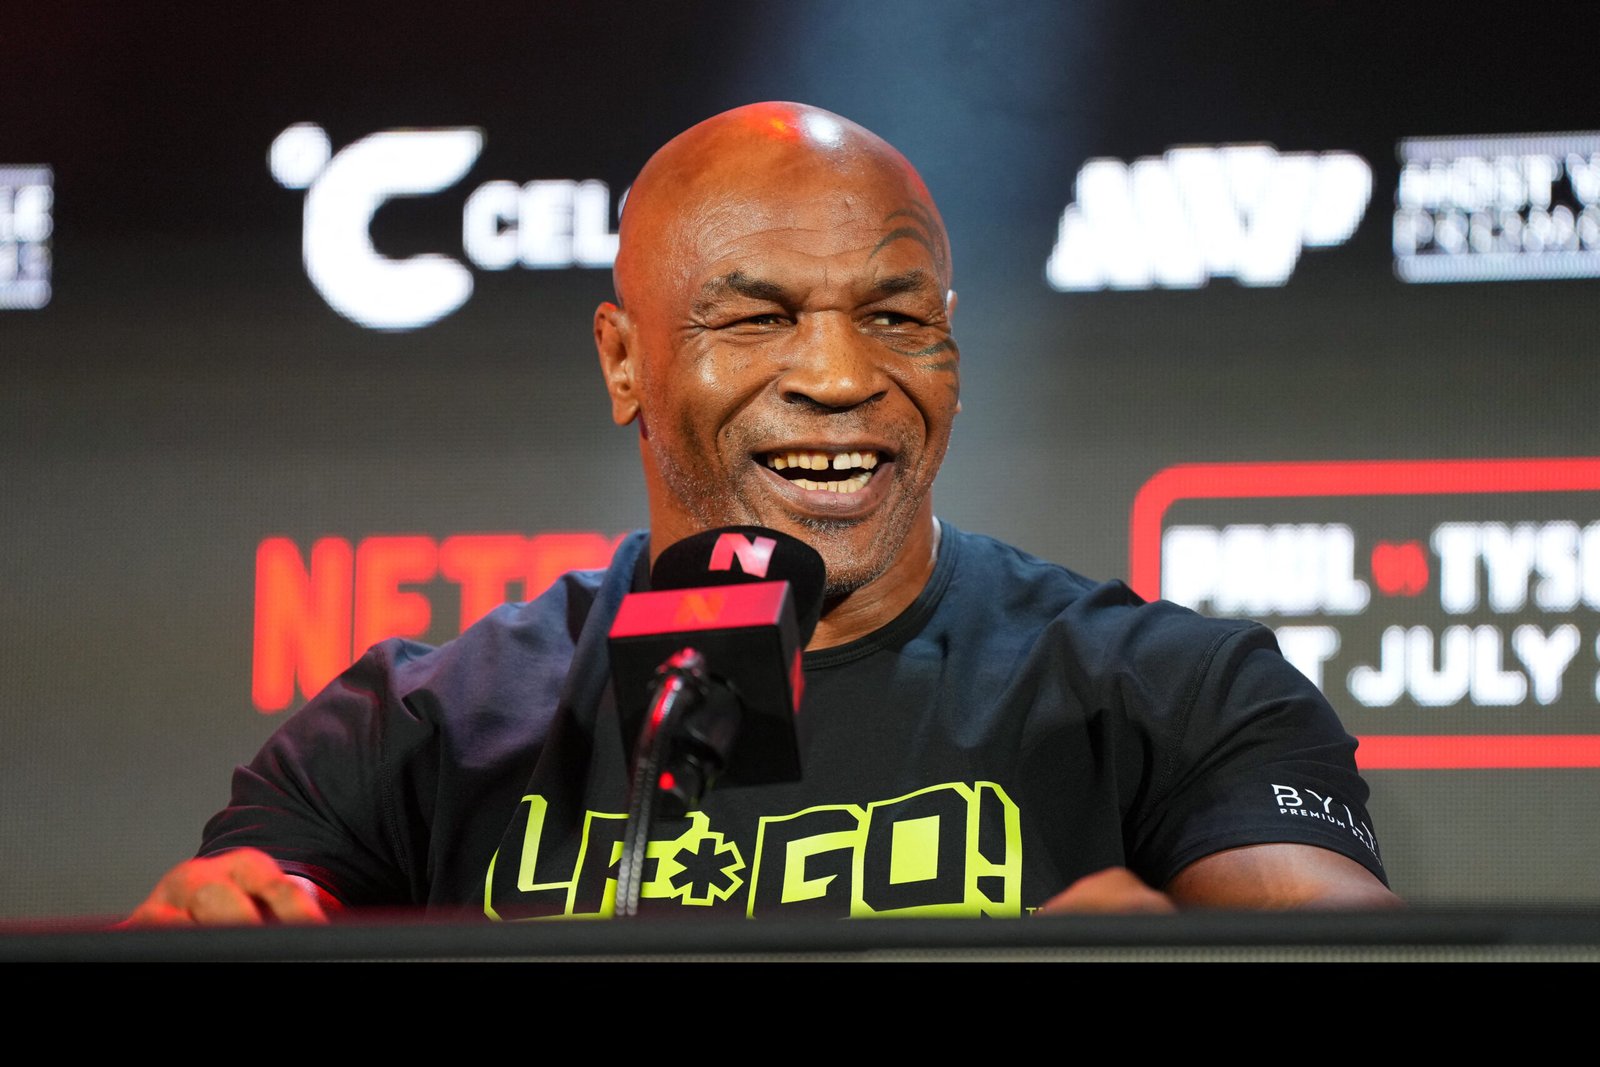 Mike Tyson says he feels ‘100%’ after plane health scare